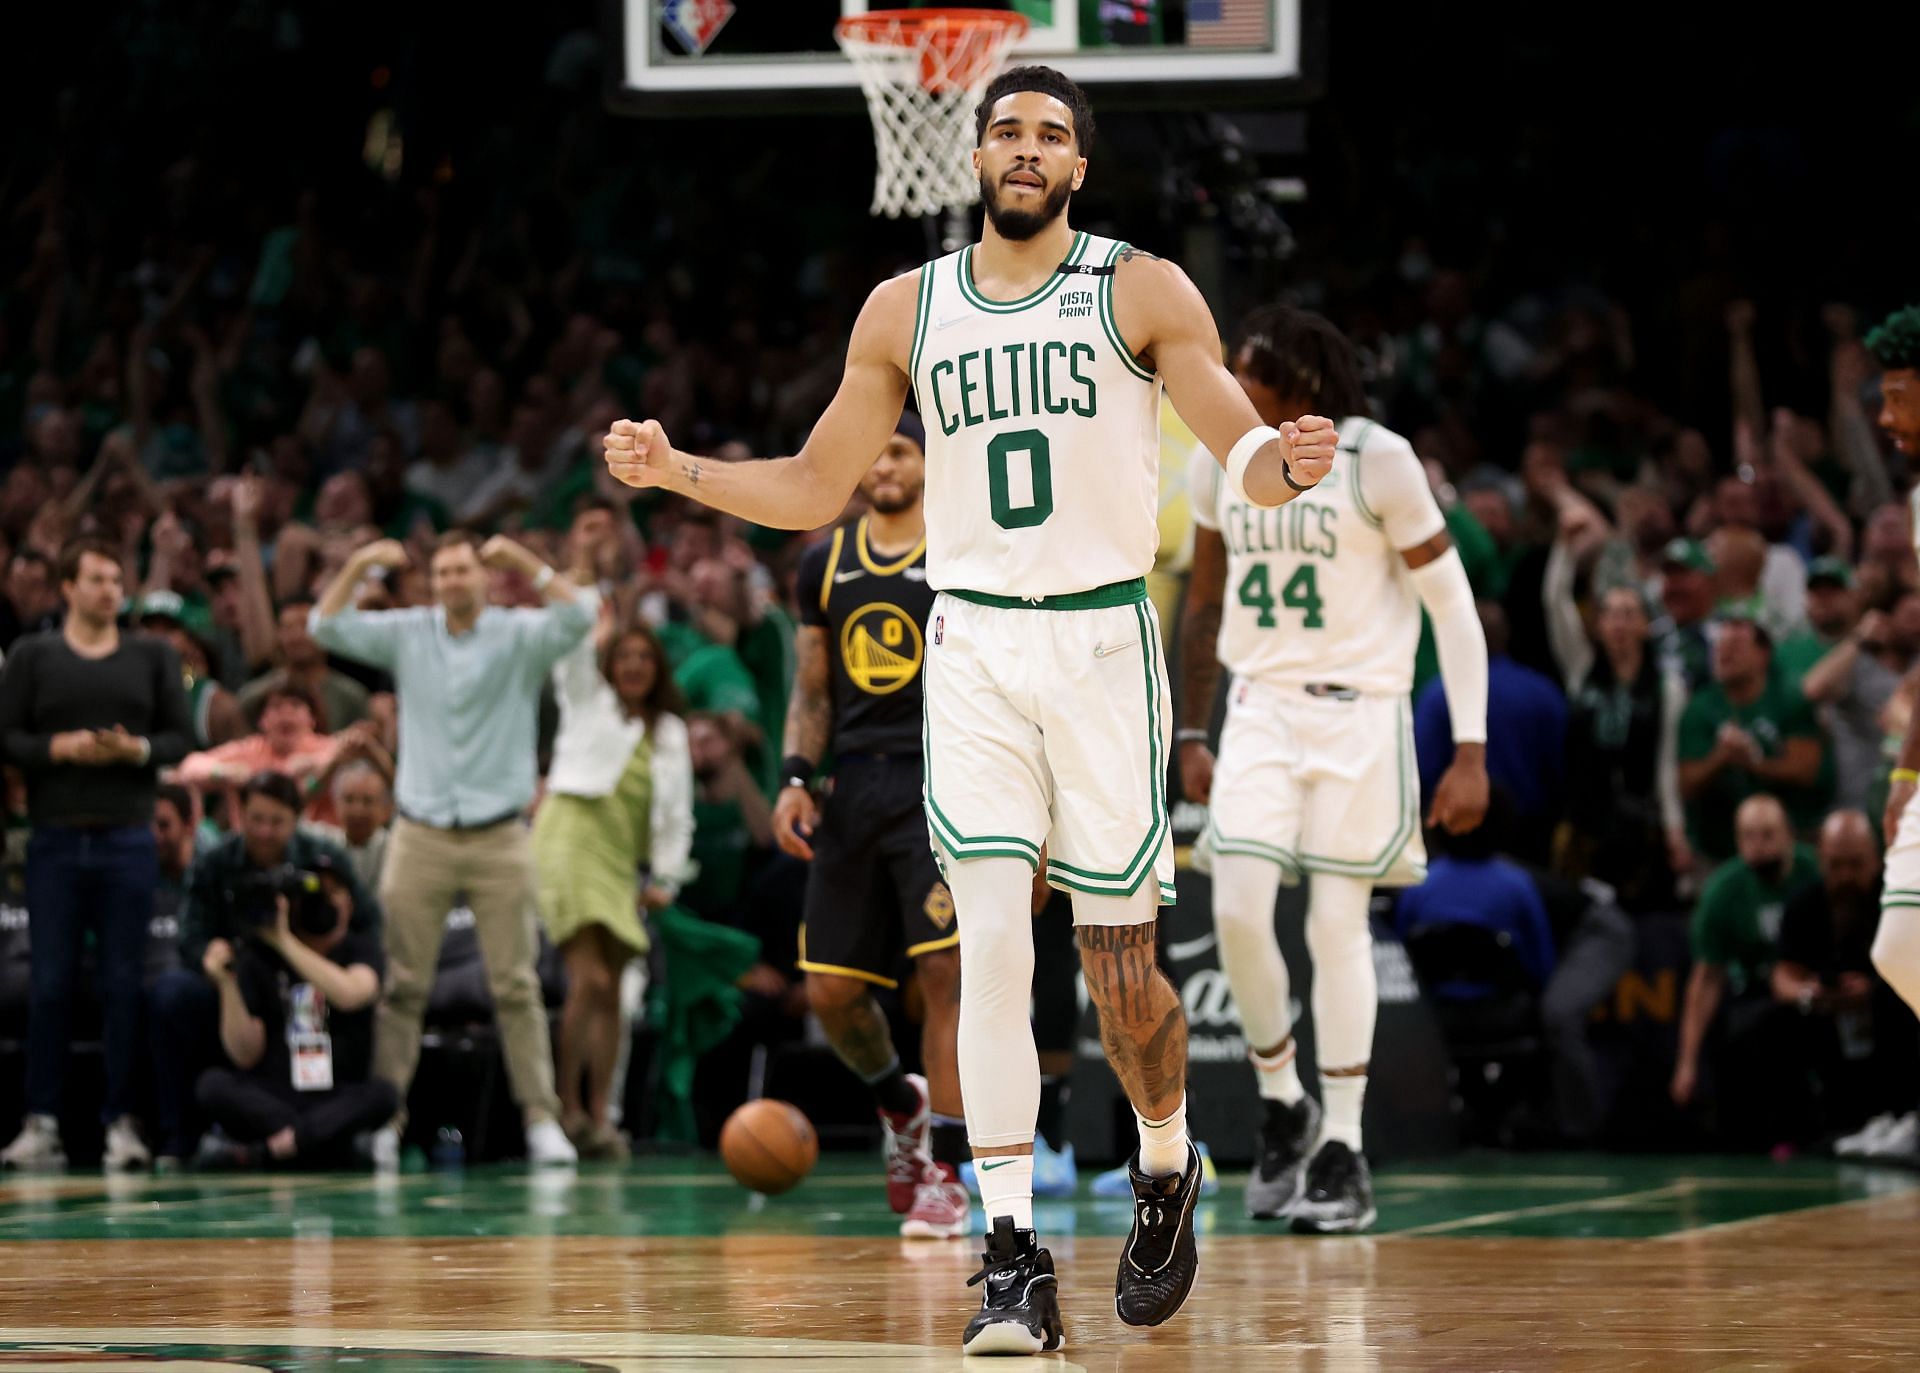 Jayson Tatum and Nelly have St. Louis moment at NBA Finals